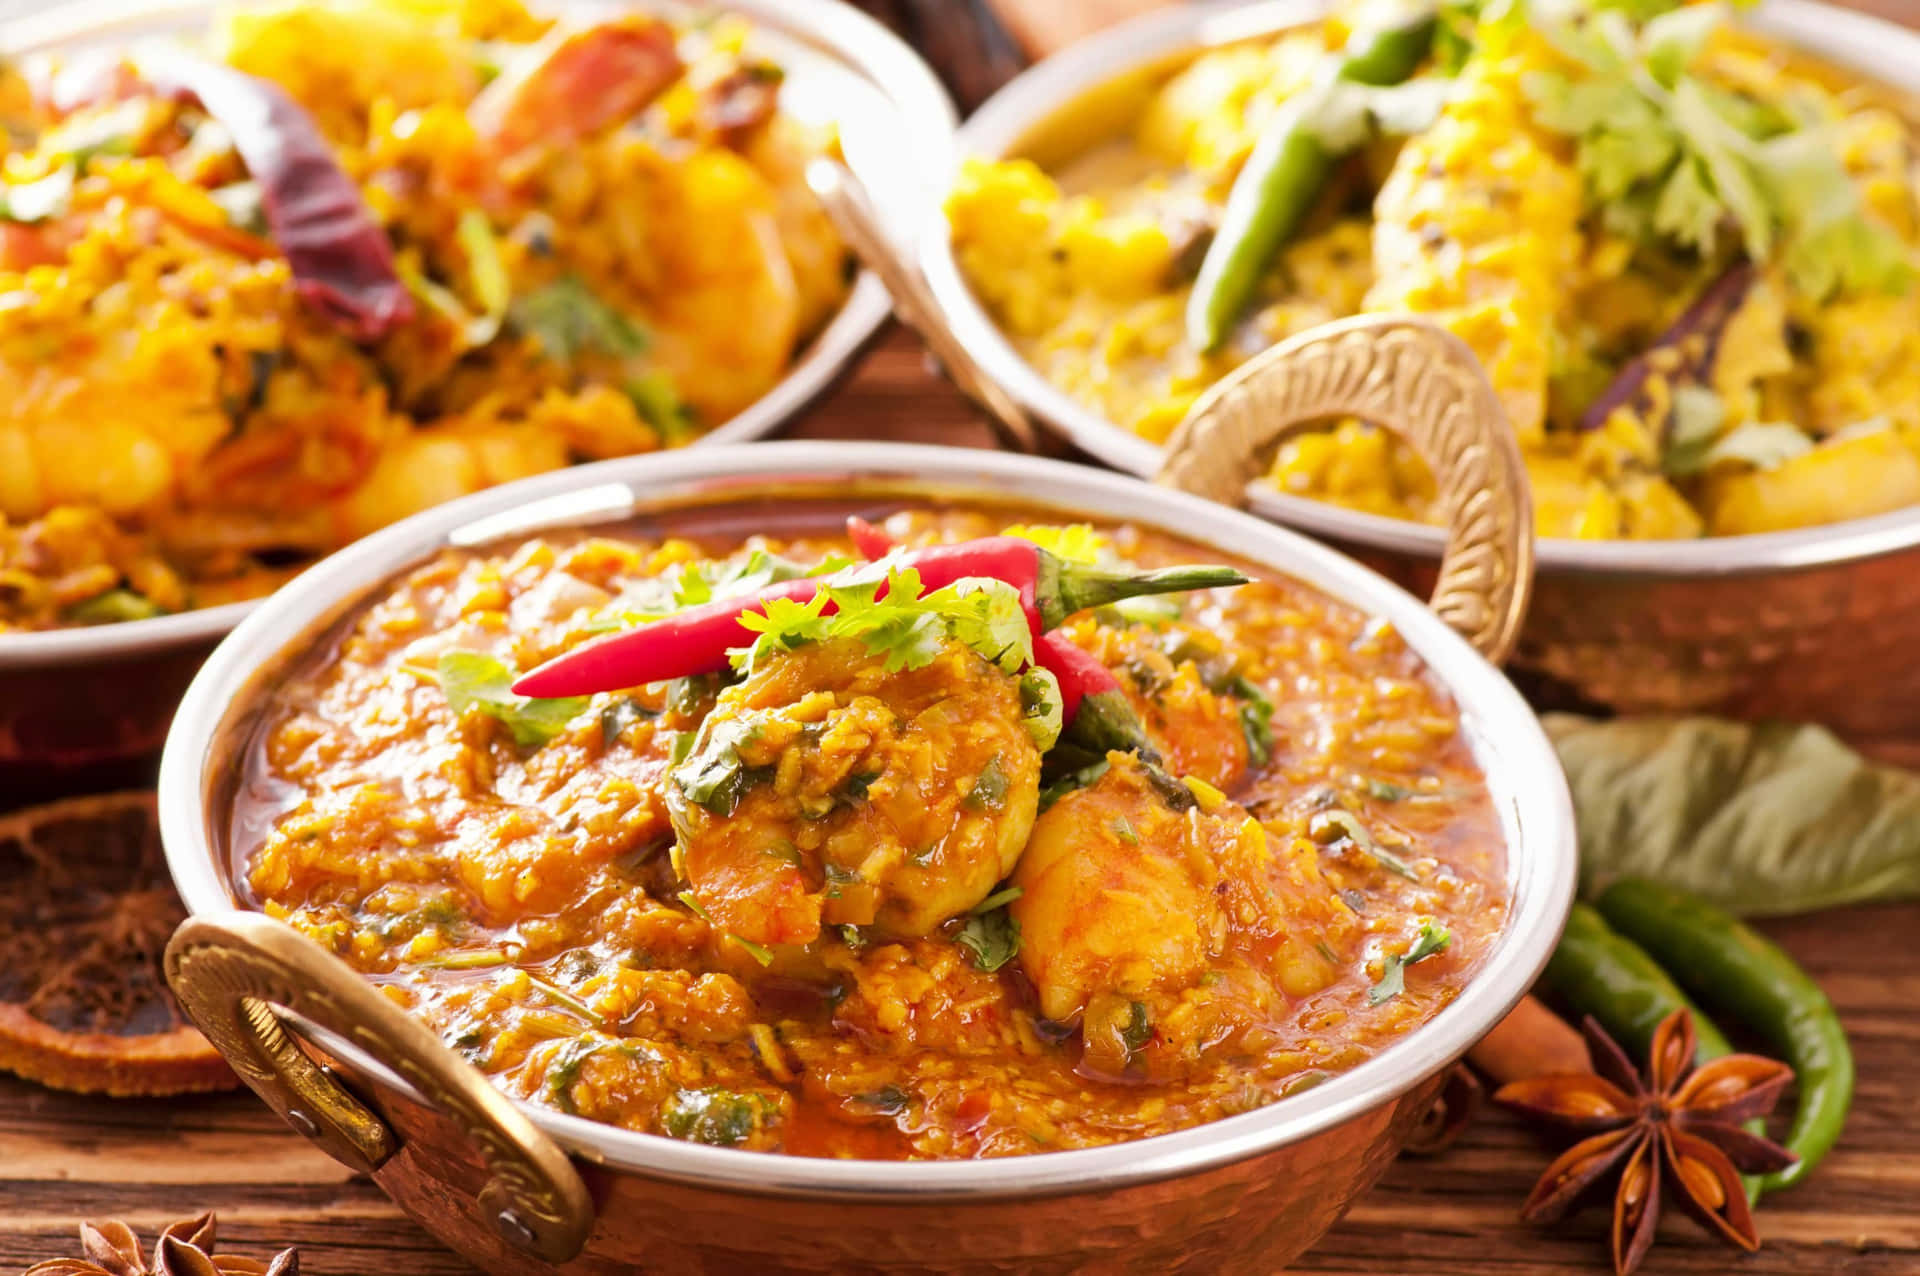 A Delicious Spread of Traditional Indian Cuisine